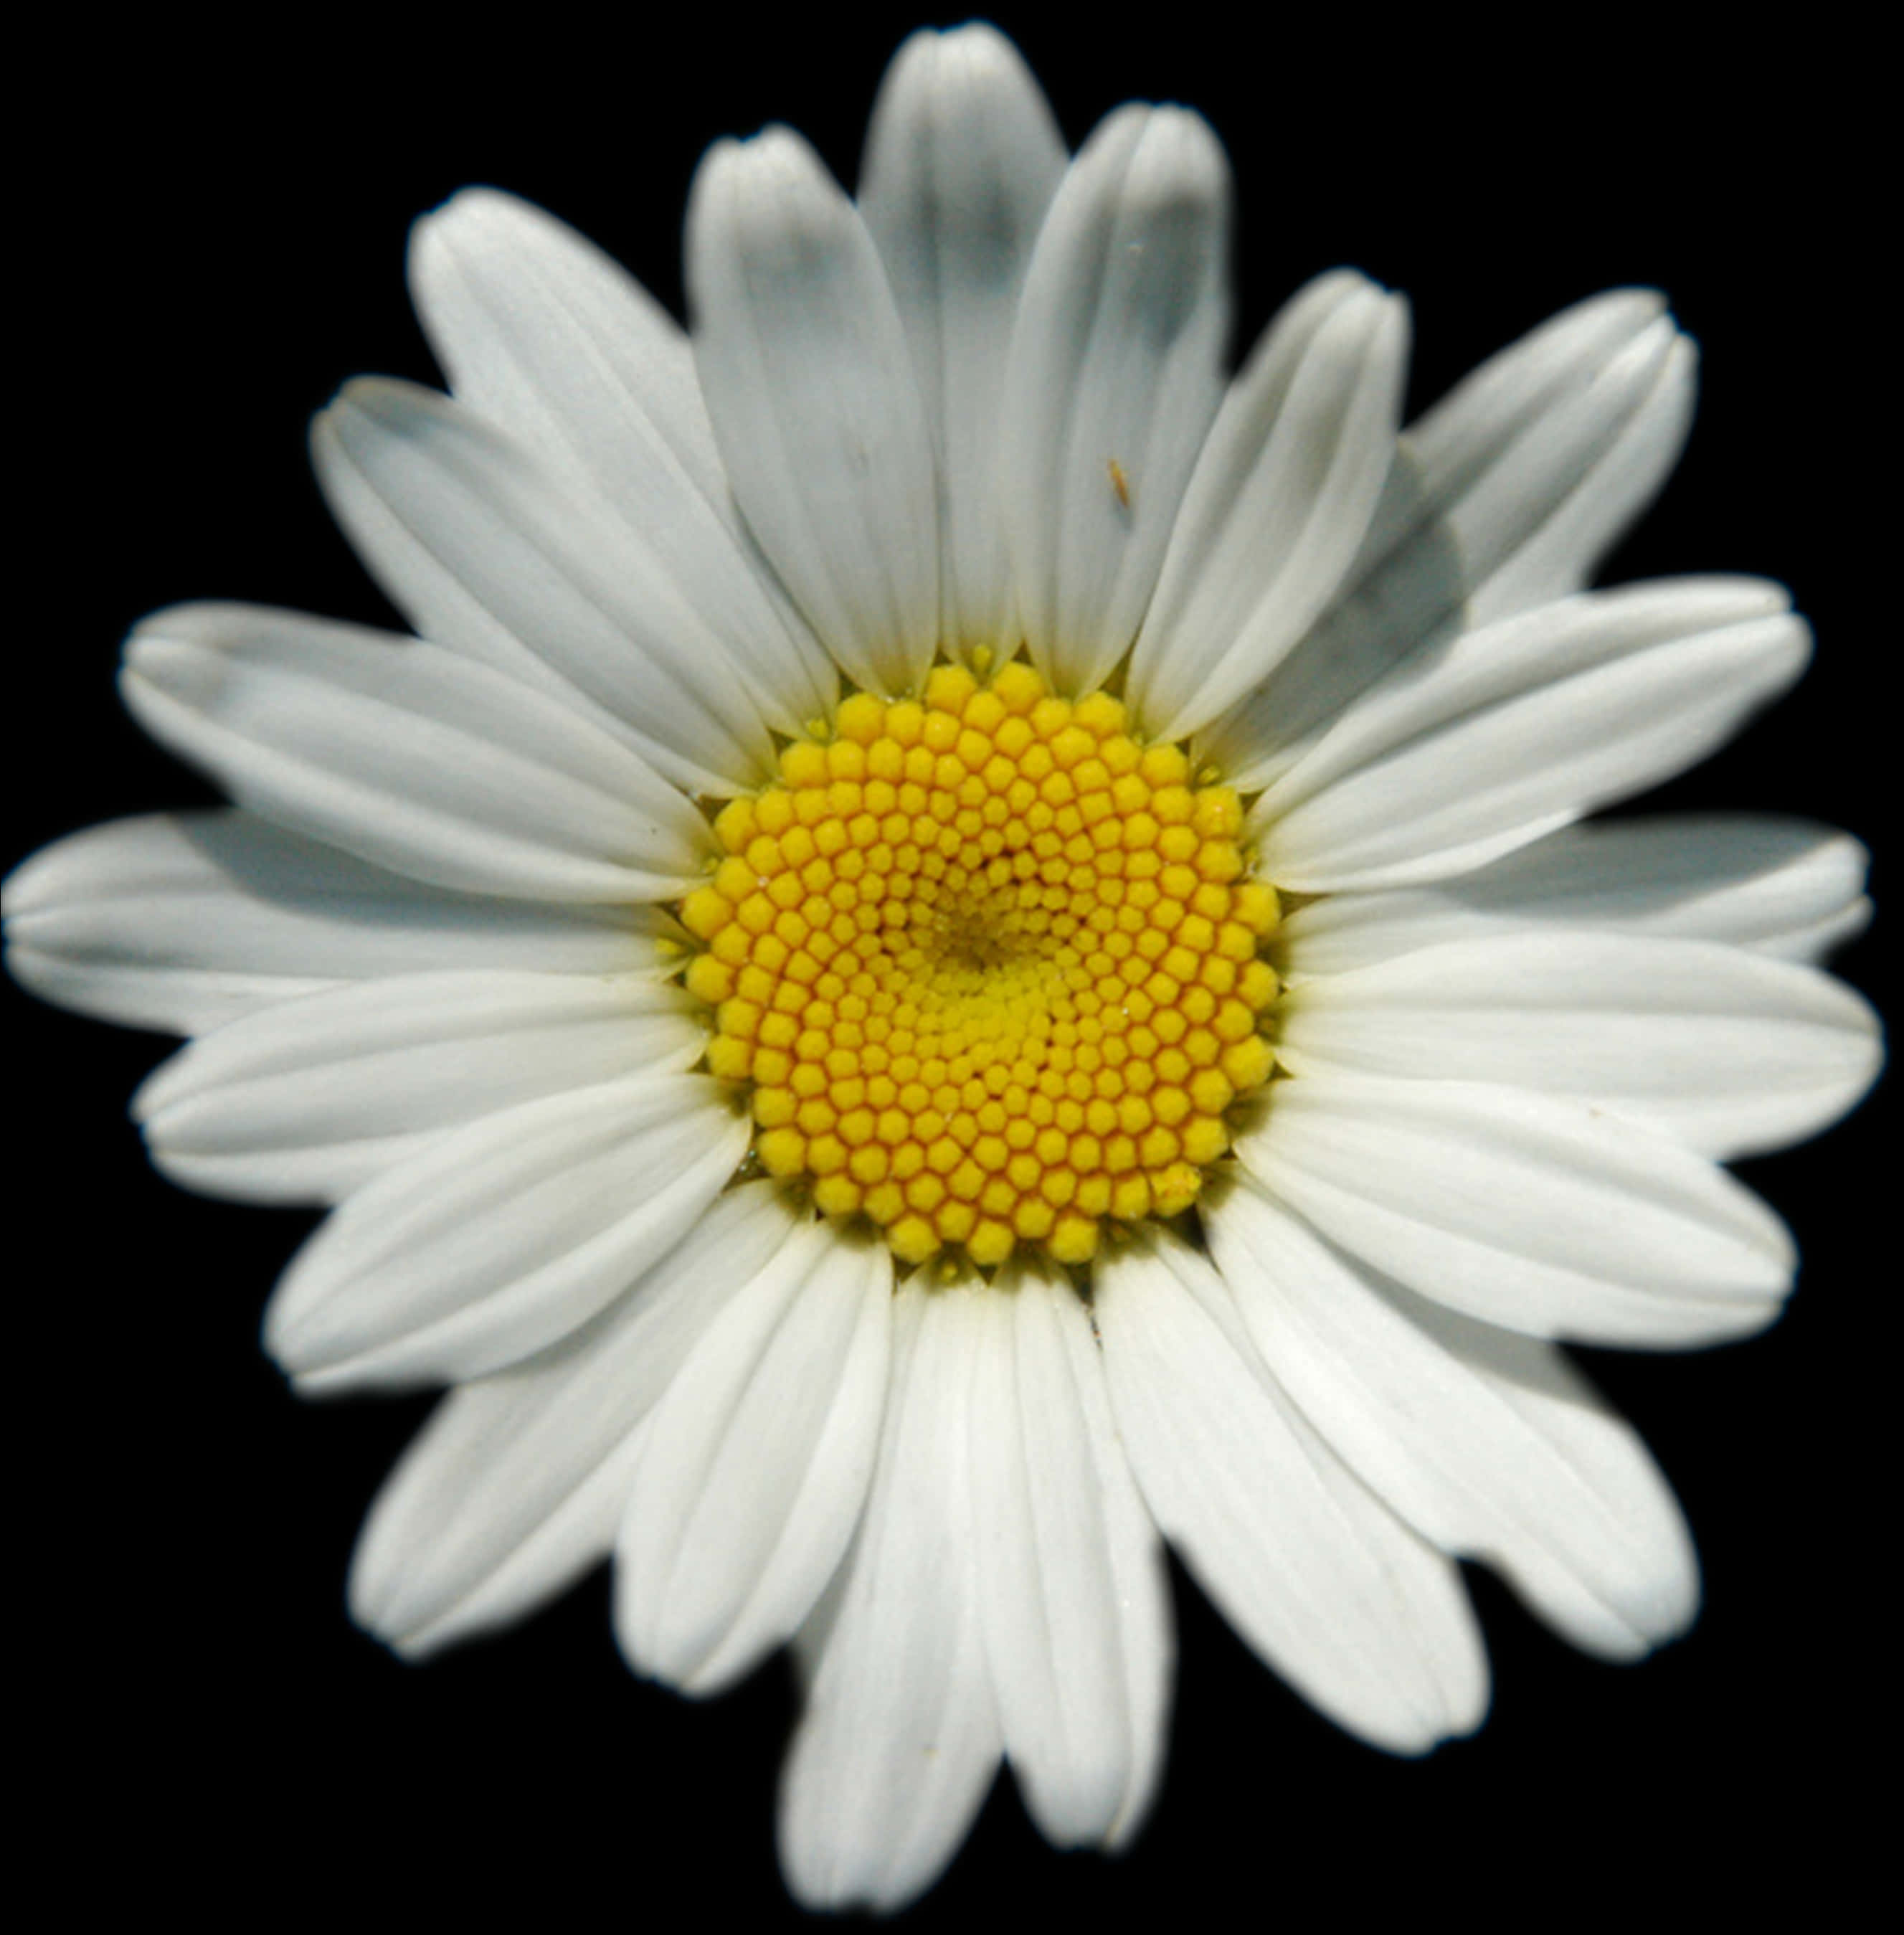 Vibrant Daisy Black Background PNG